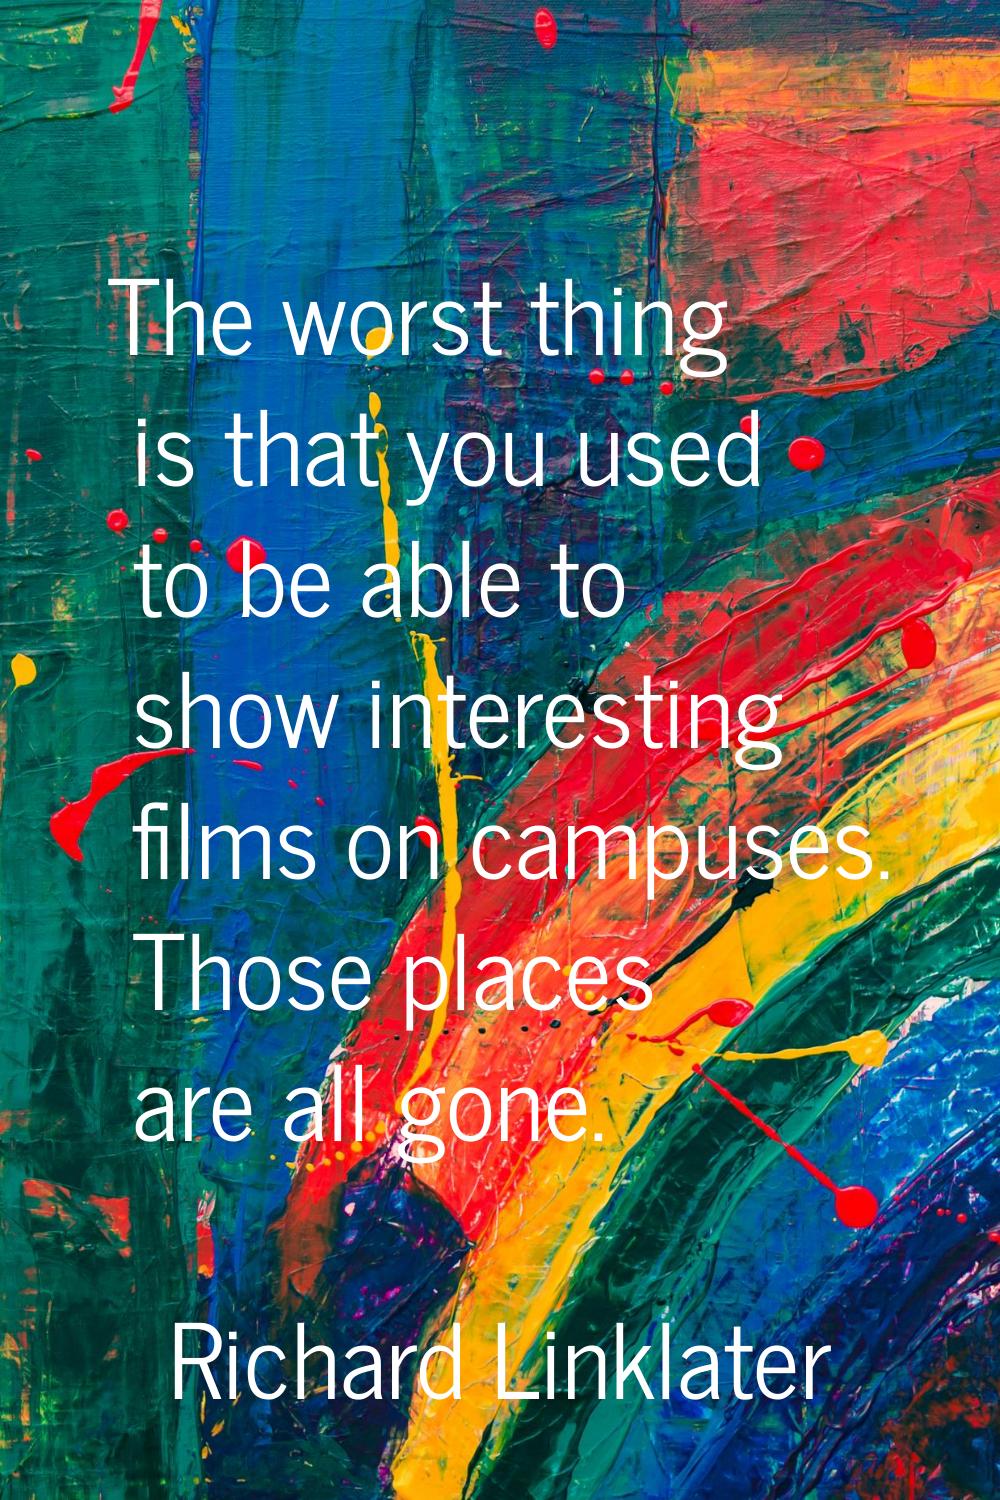 The worst thing is that you used to be able to show interesting films on campuses. Those places are